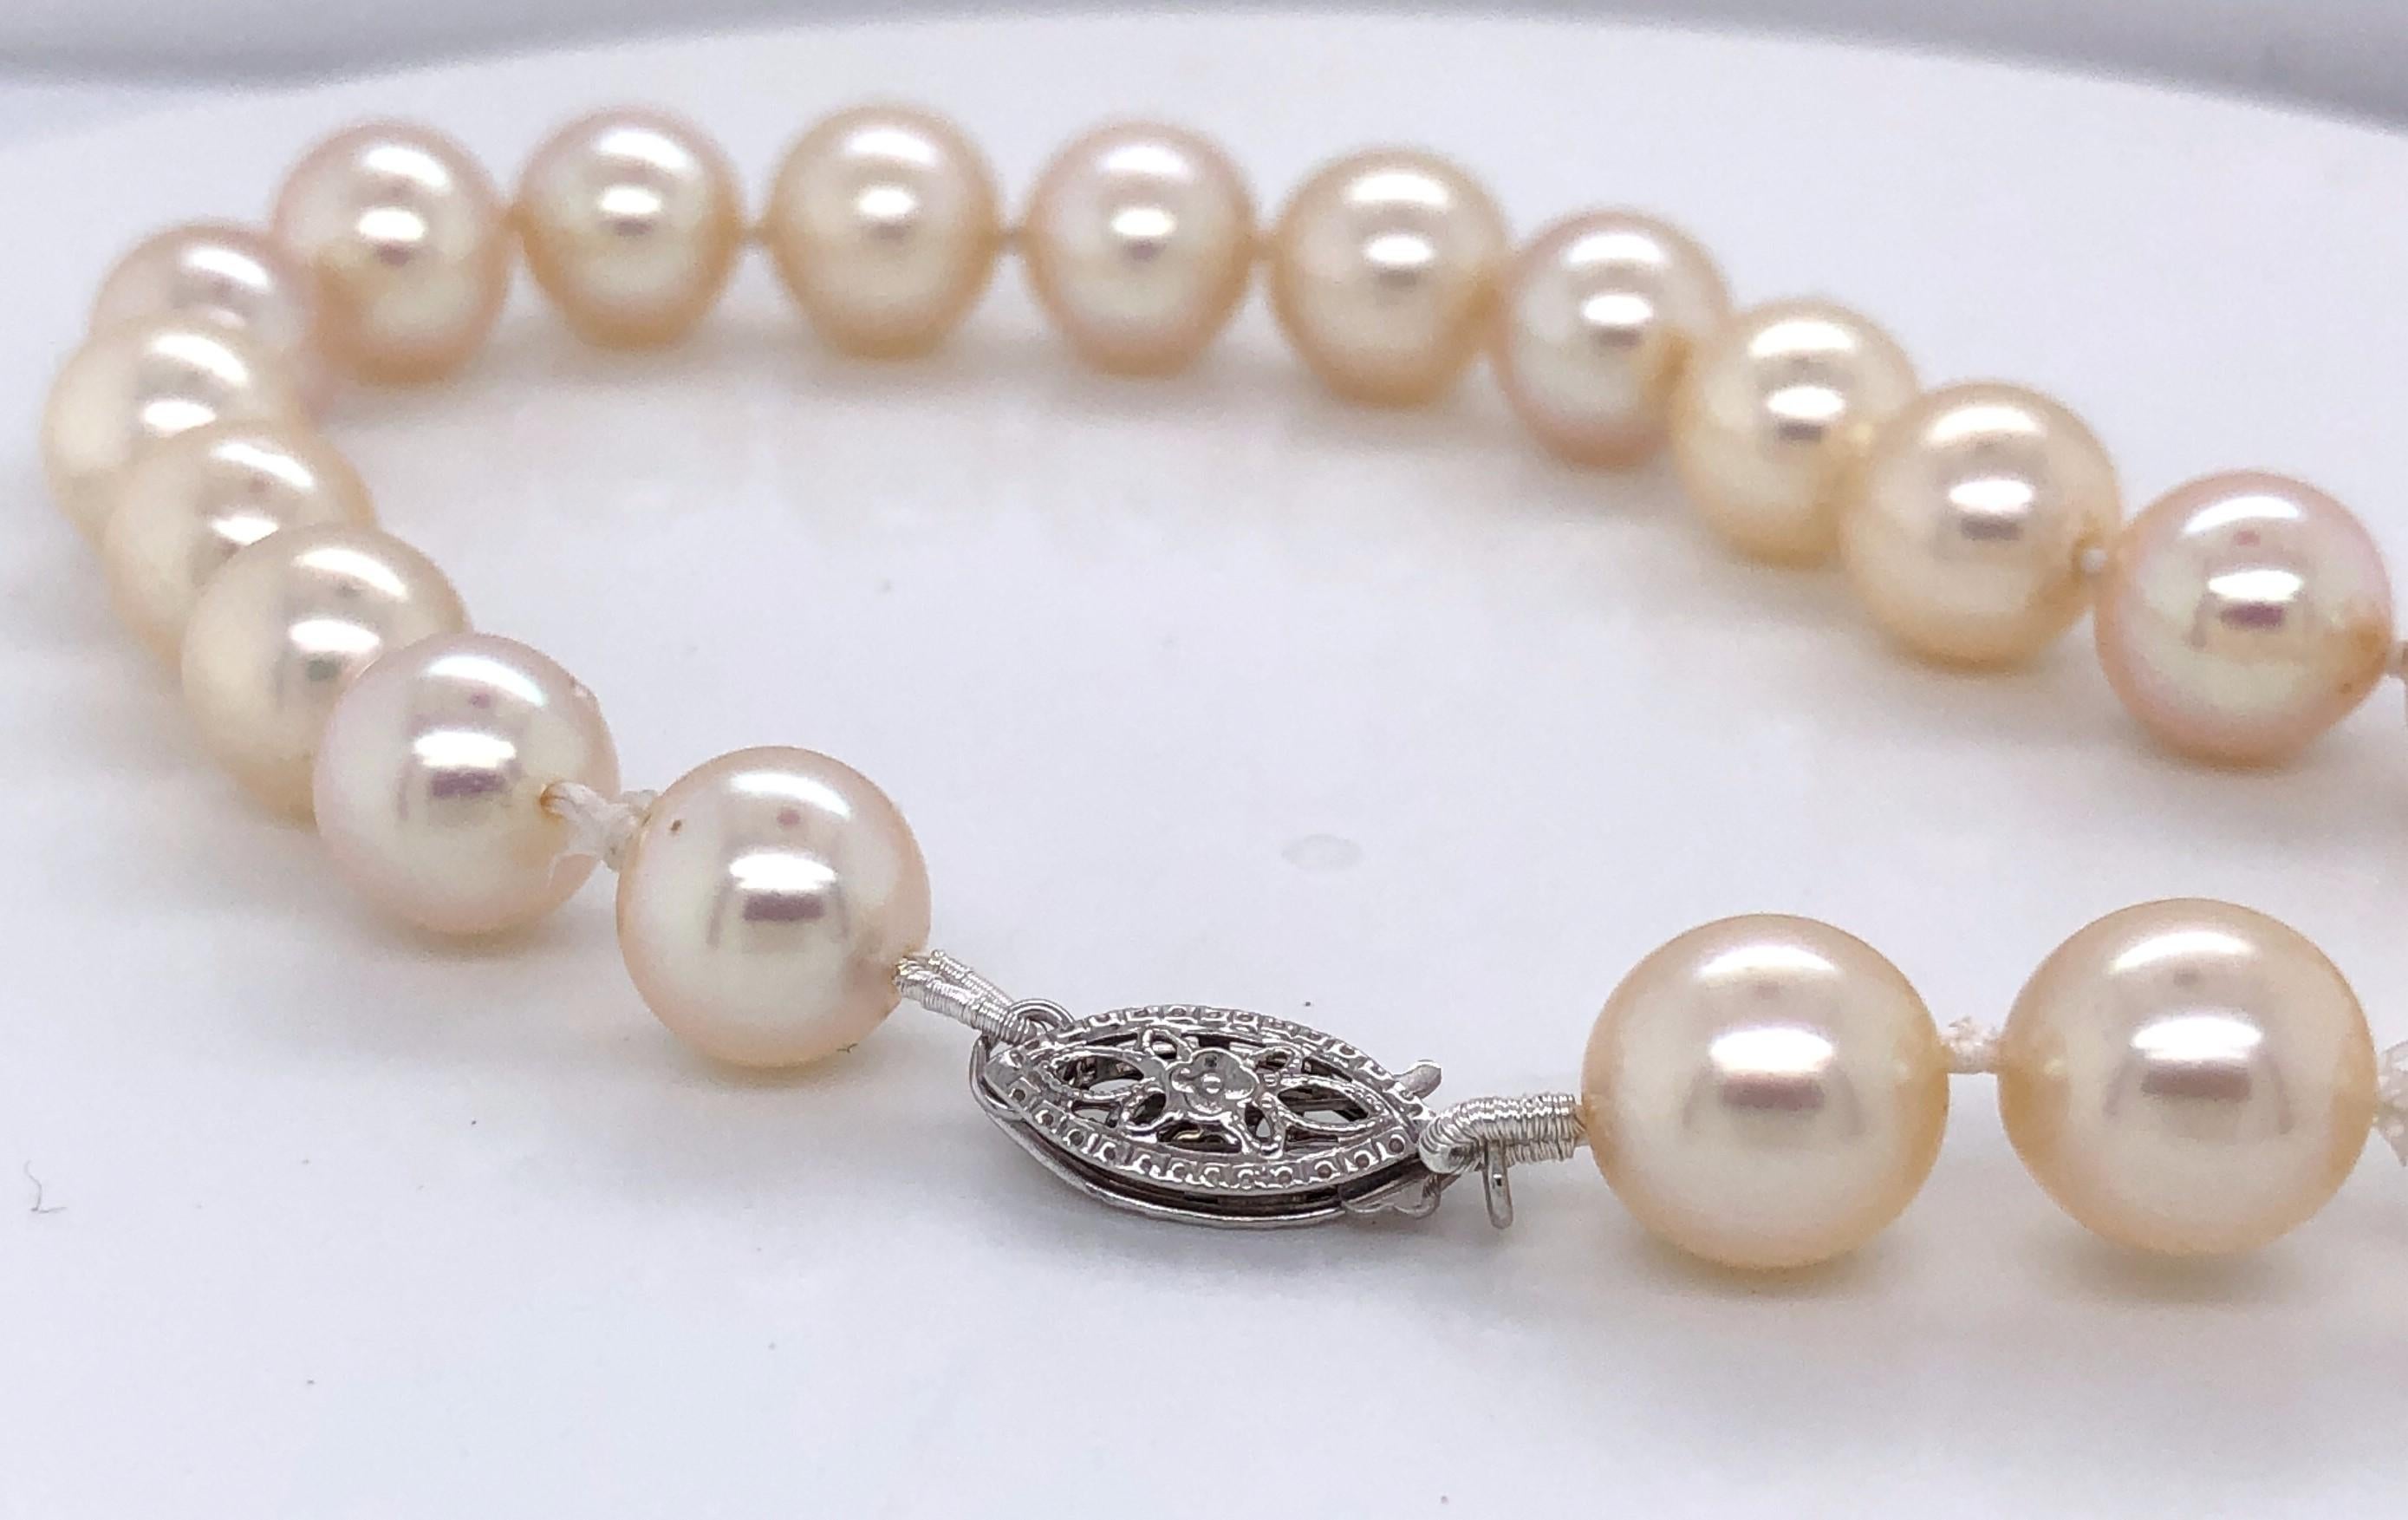 One bracelet knot strung with twenty-two 8mm cultured Akoya pearls.  The bracelet measures 8.25 inches long and has a traditional 14 karat white gold filigree clasp. 